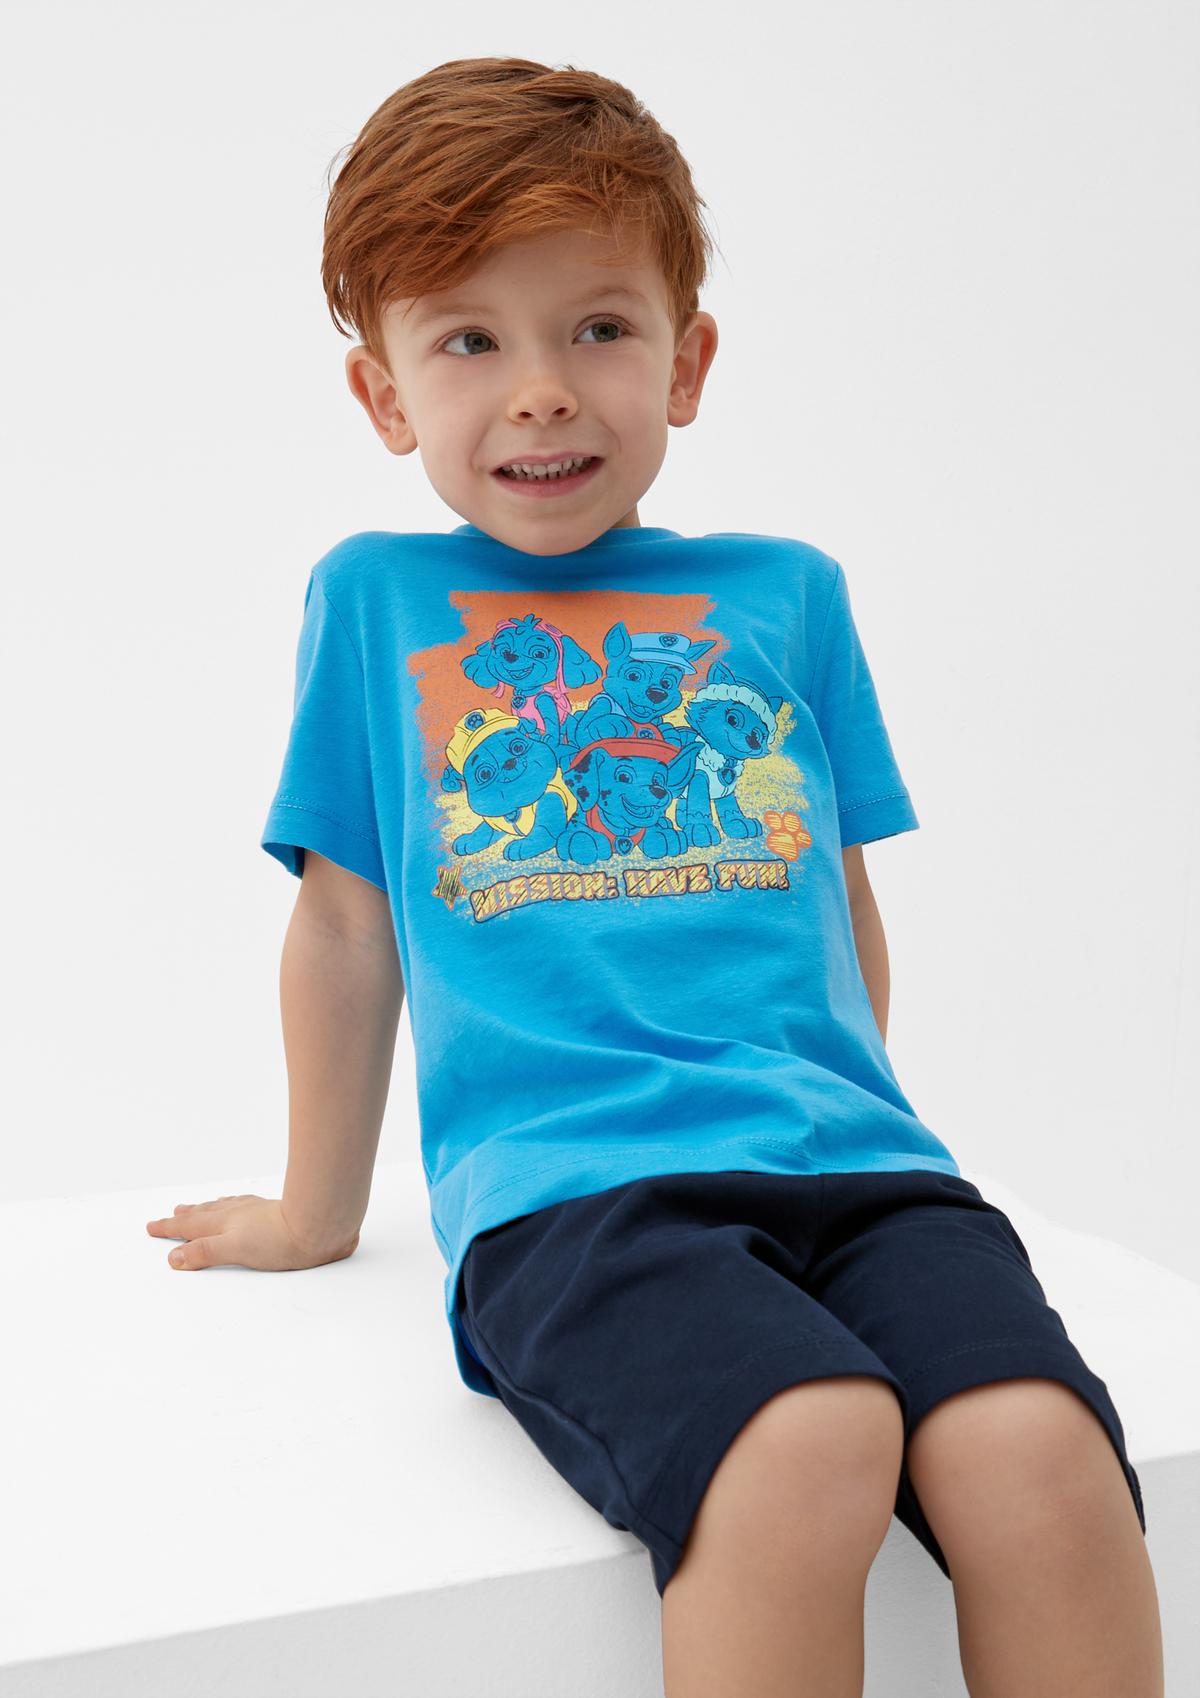 s.Oliver Cotton T-shirt with a Paw Patrol motif